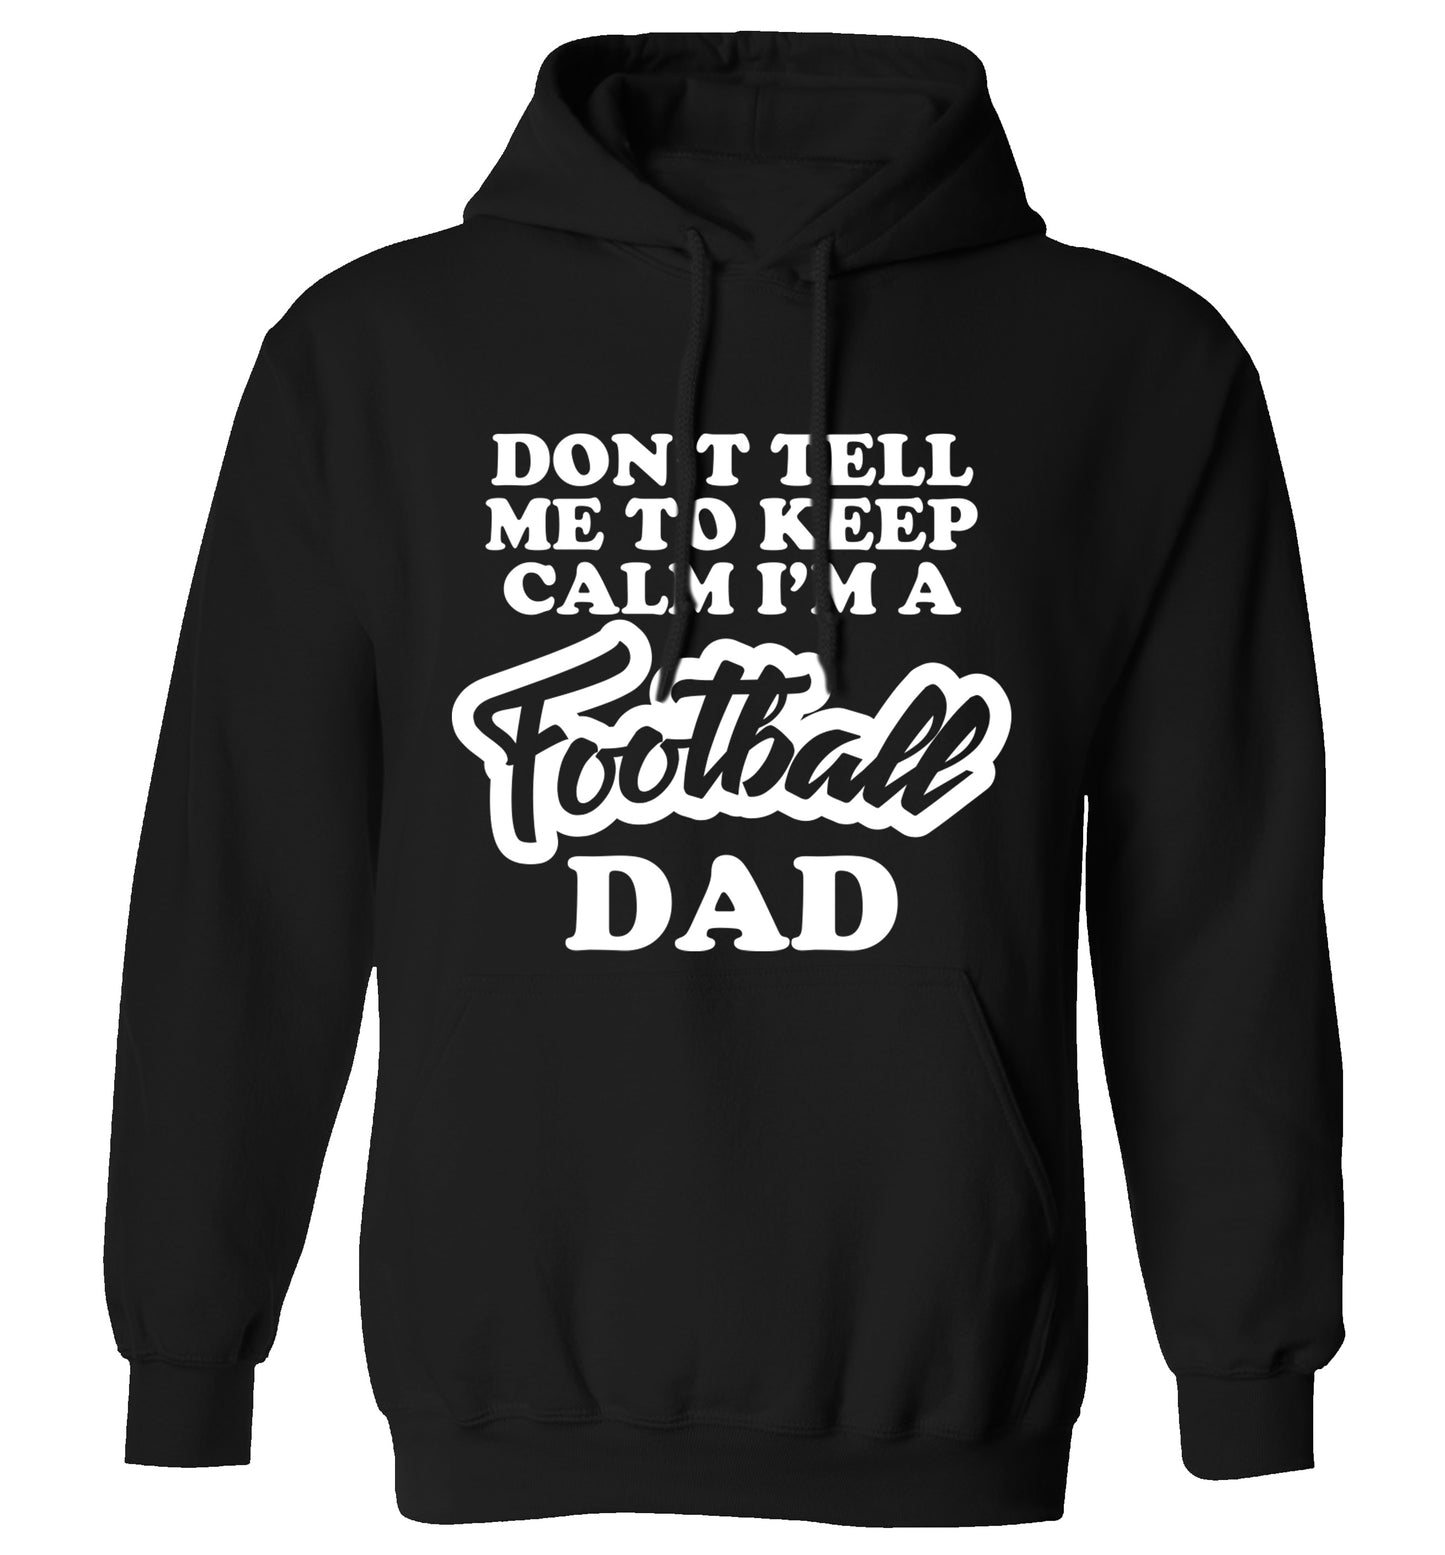 Don't tell me to keep calm I'm a football dad adults unisexblack hoodie 2XL